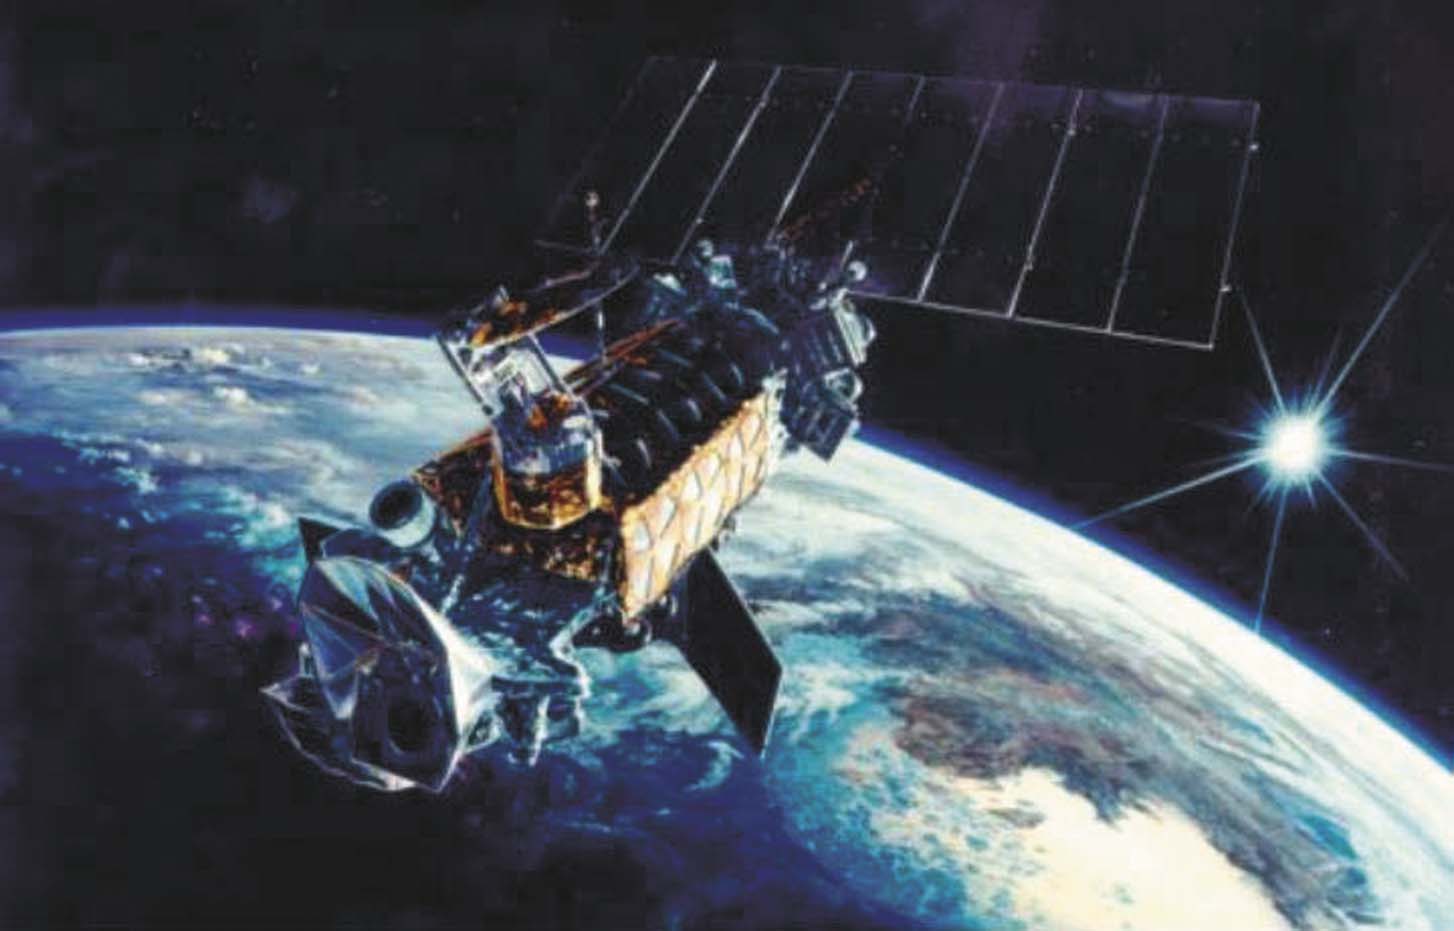 A Military Weather Satellite Exploded in Space